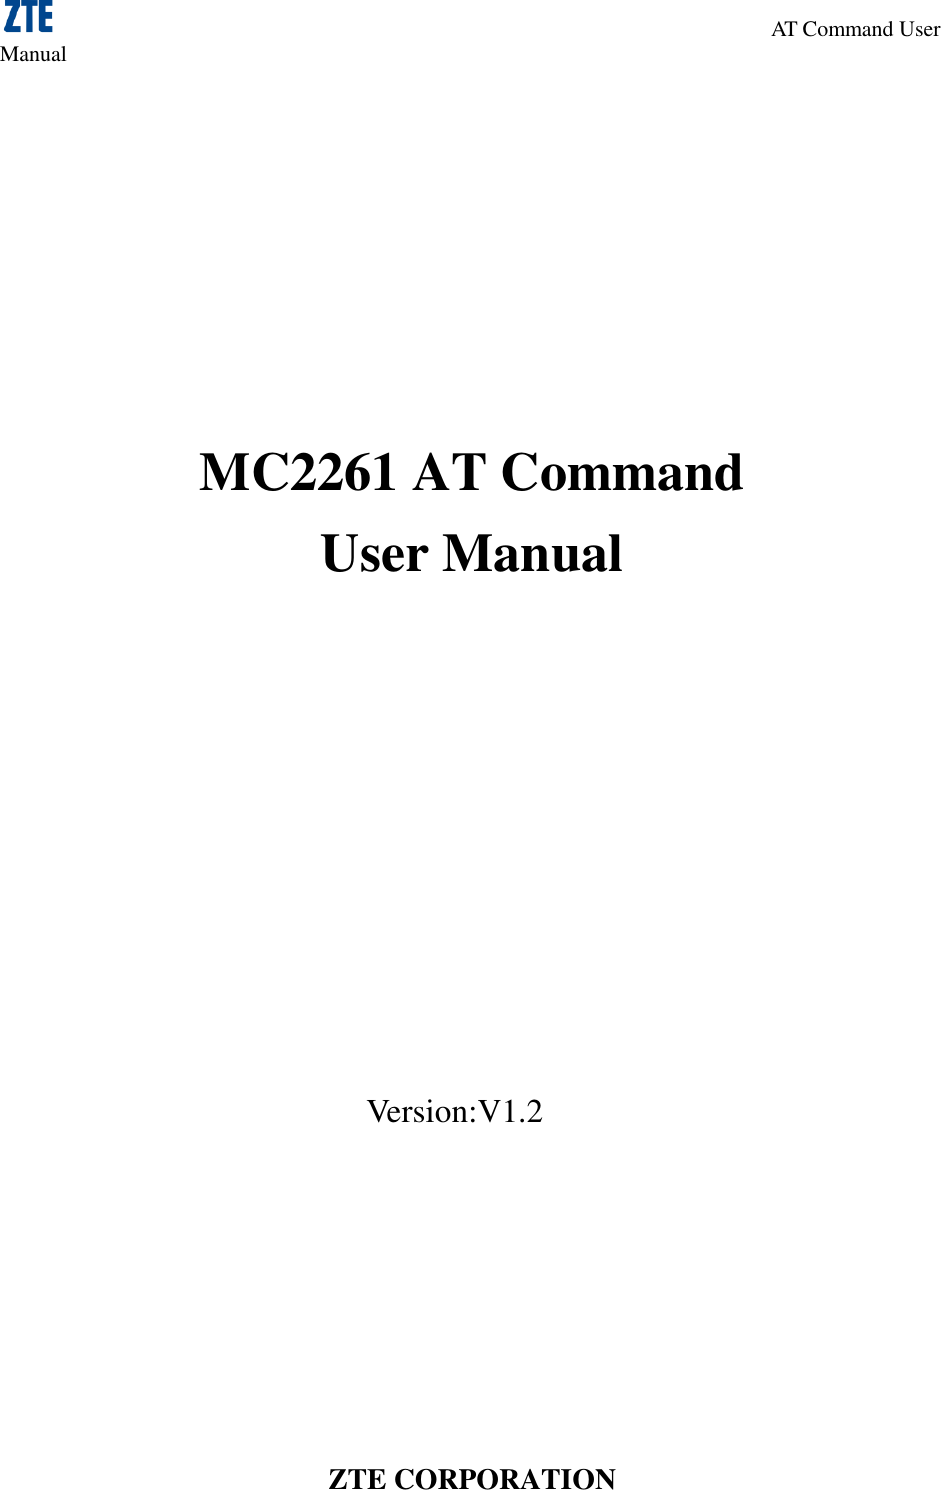                                                                      AT Command User Manual       MC2261 AT Command User Manual                                                                 Version:V1.2            ZTE CORPORATION 